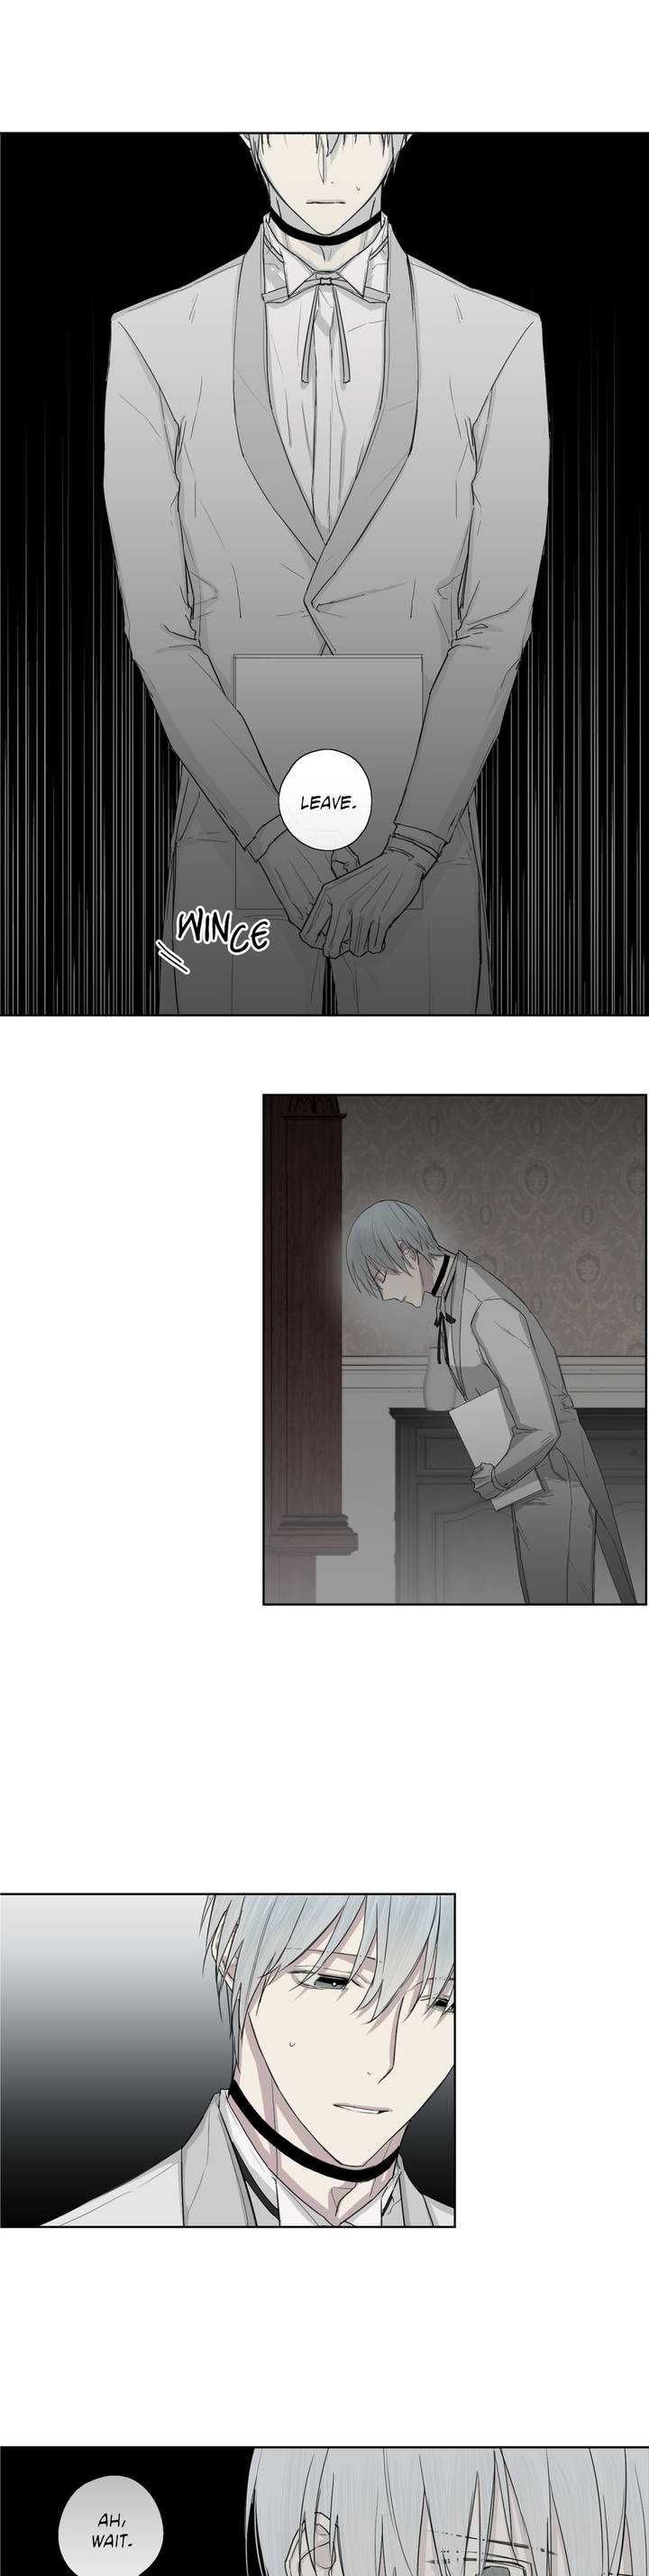 Royal Servant - Chapter 1.1 Page 3